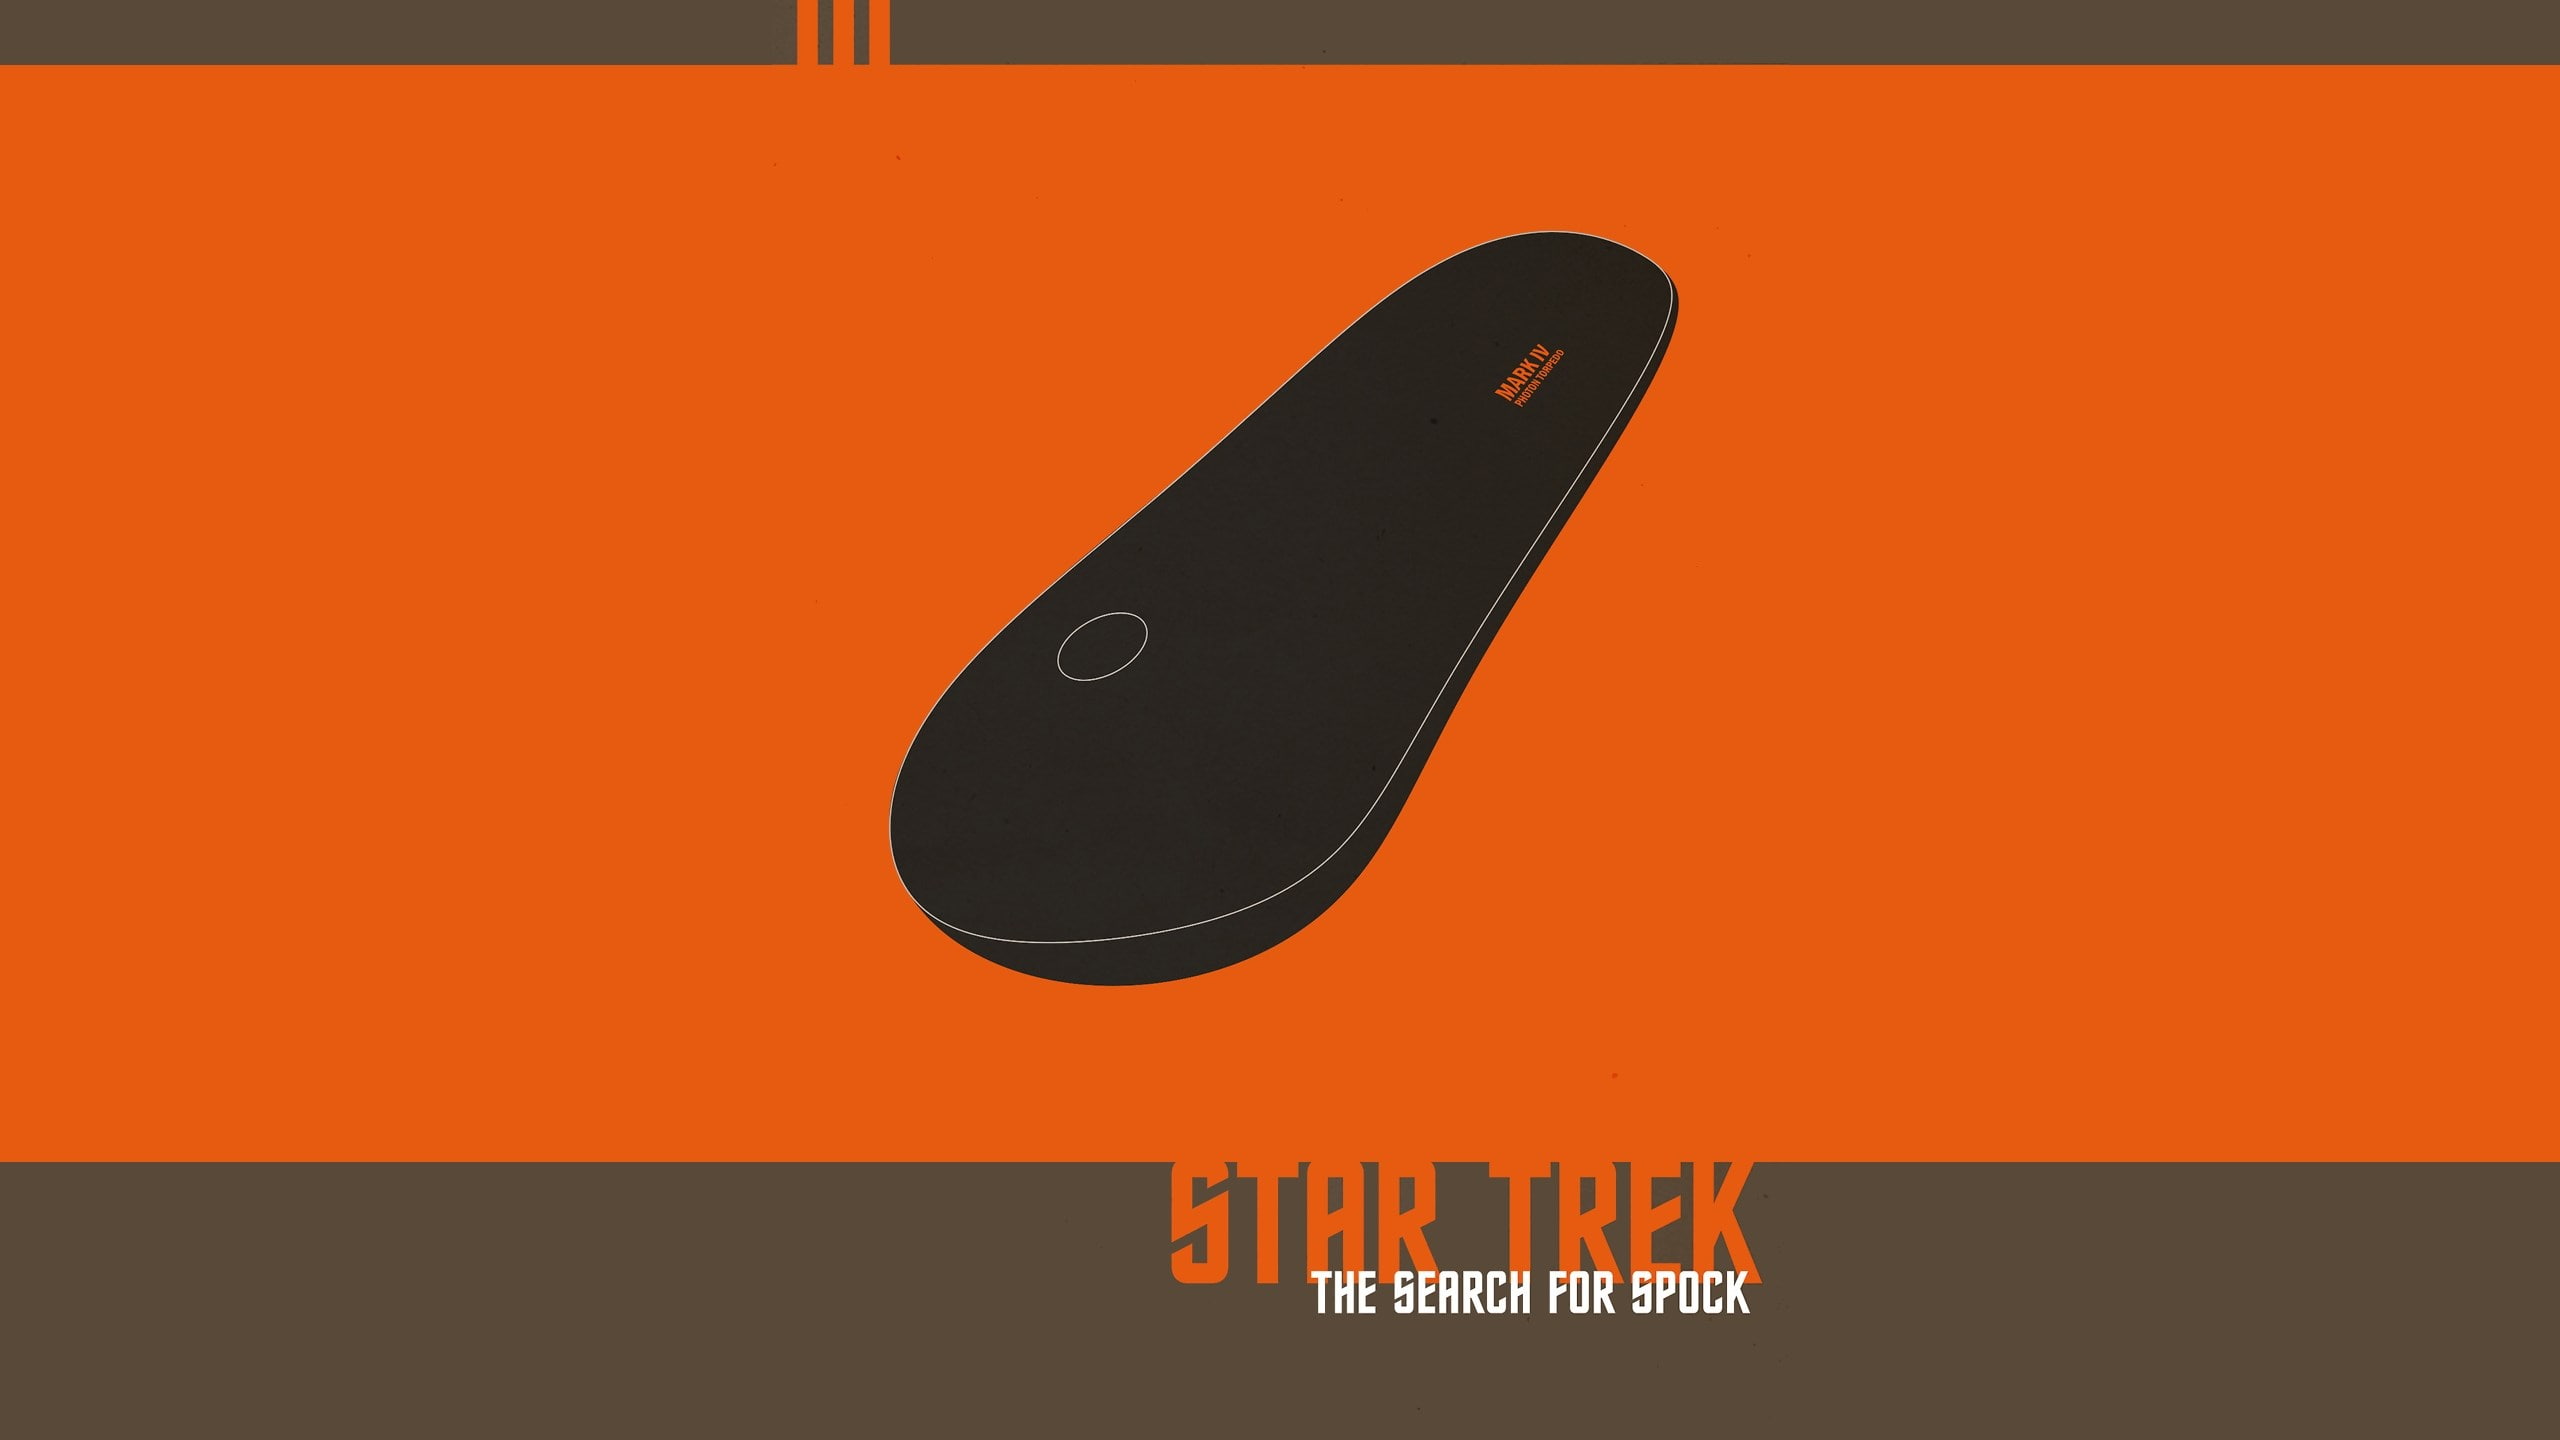 star trek iii the search for spock, orange color, technology